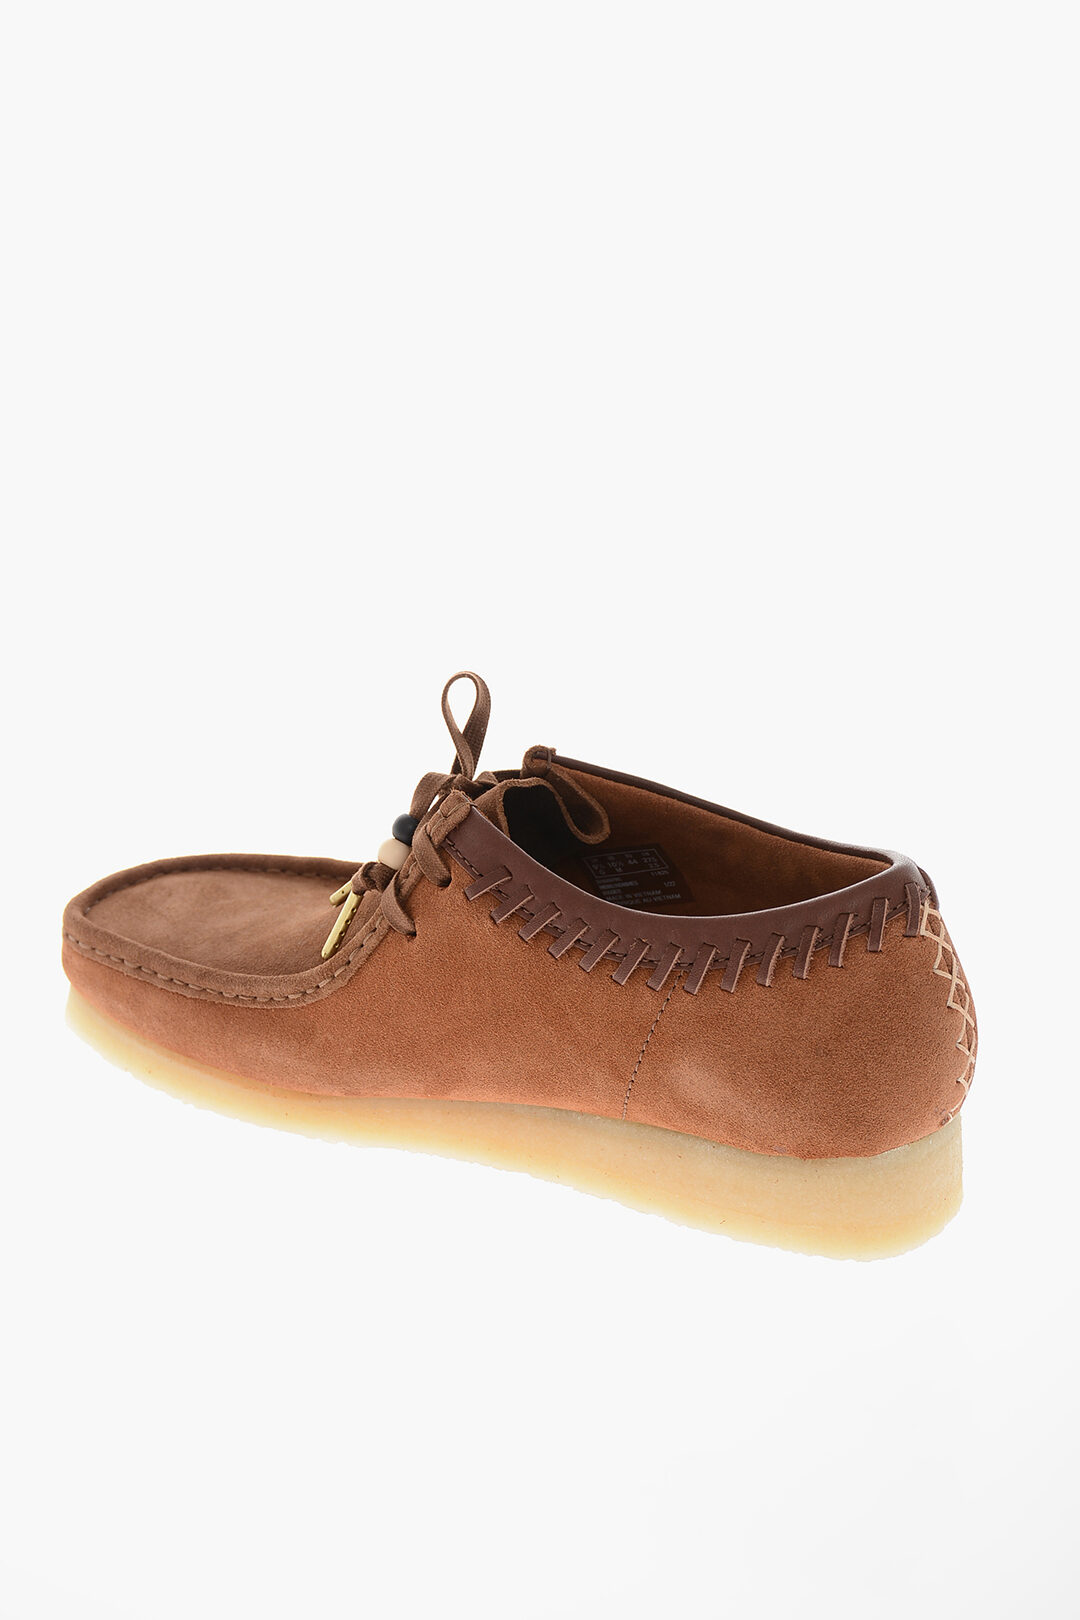 Clarks WALLABEE Desert Boots with Crepe Sole men - Glamood Outlet